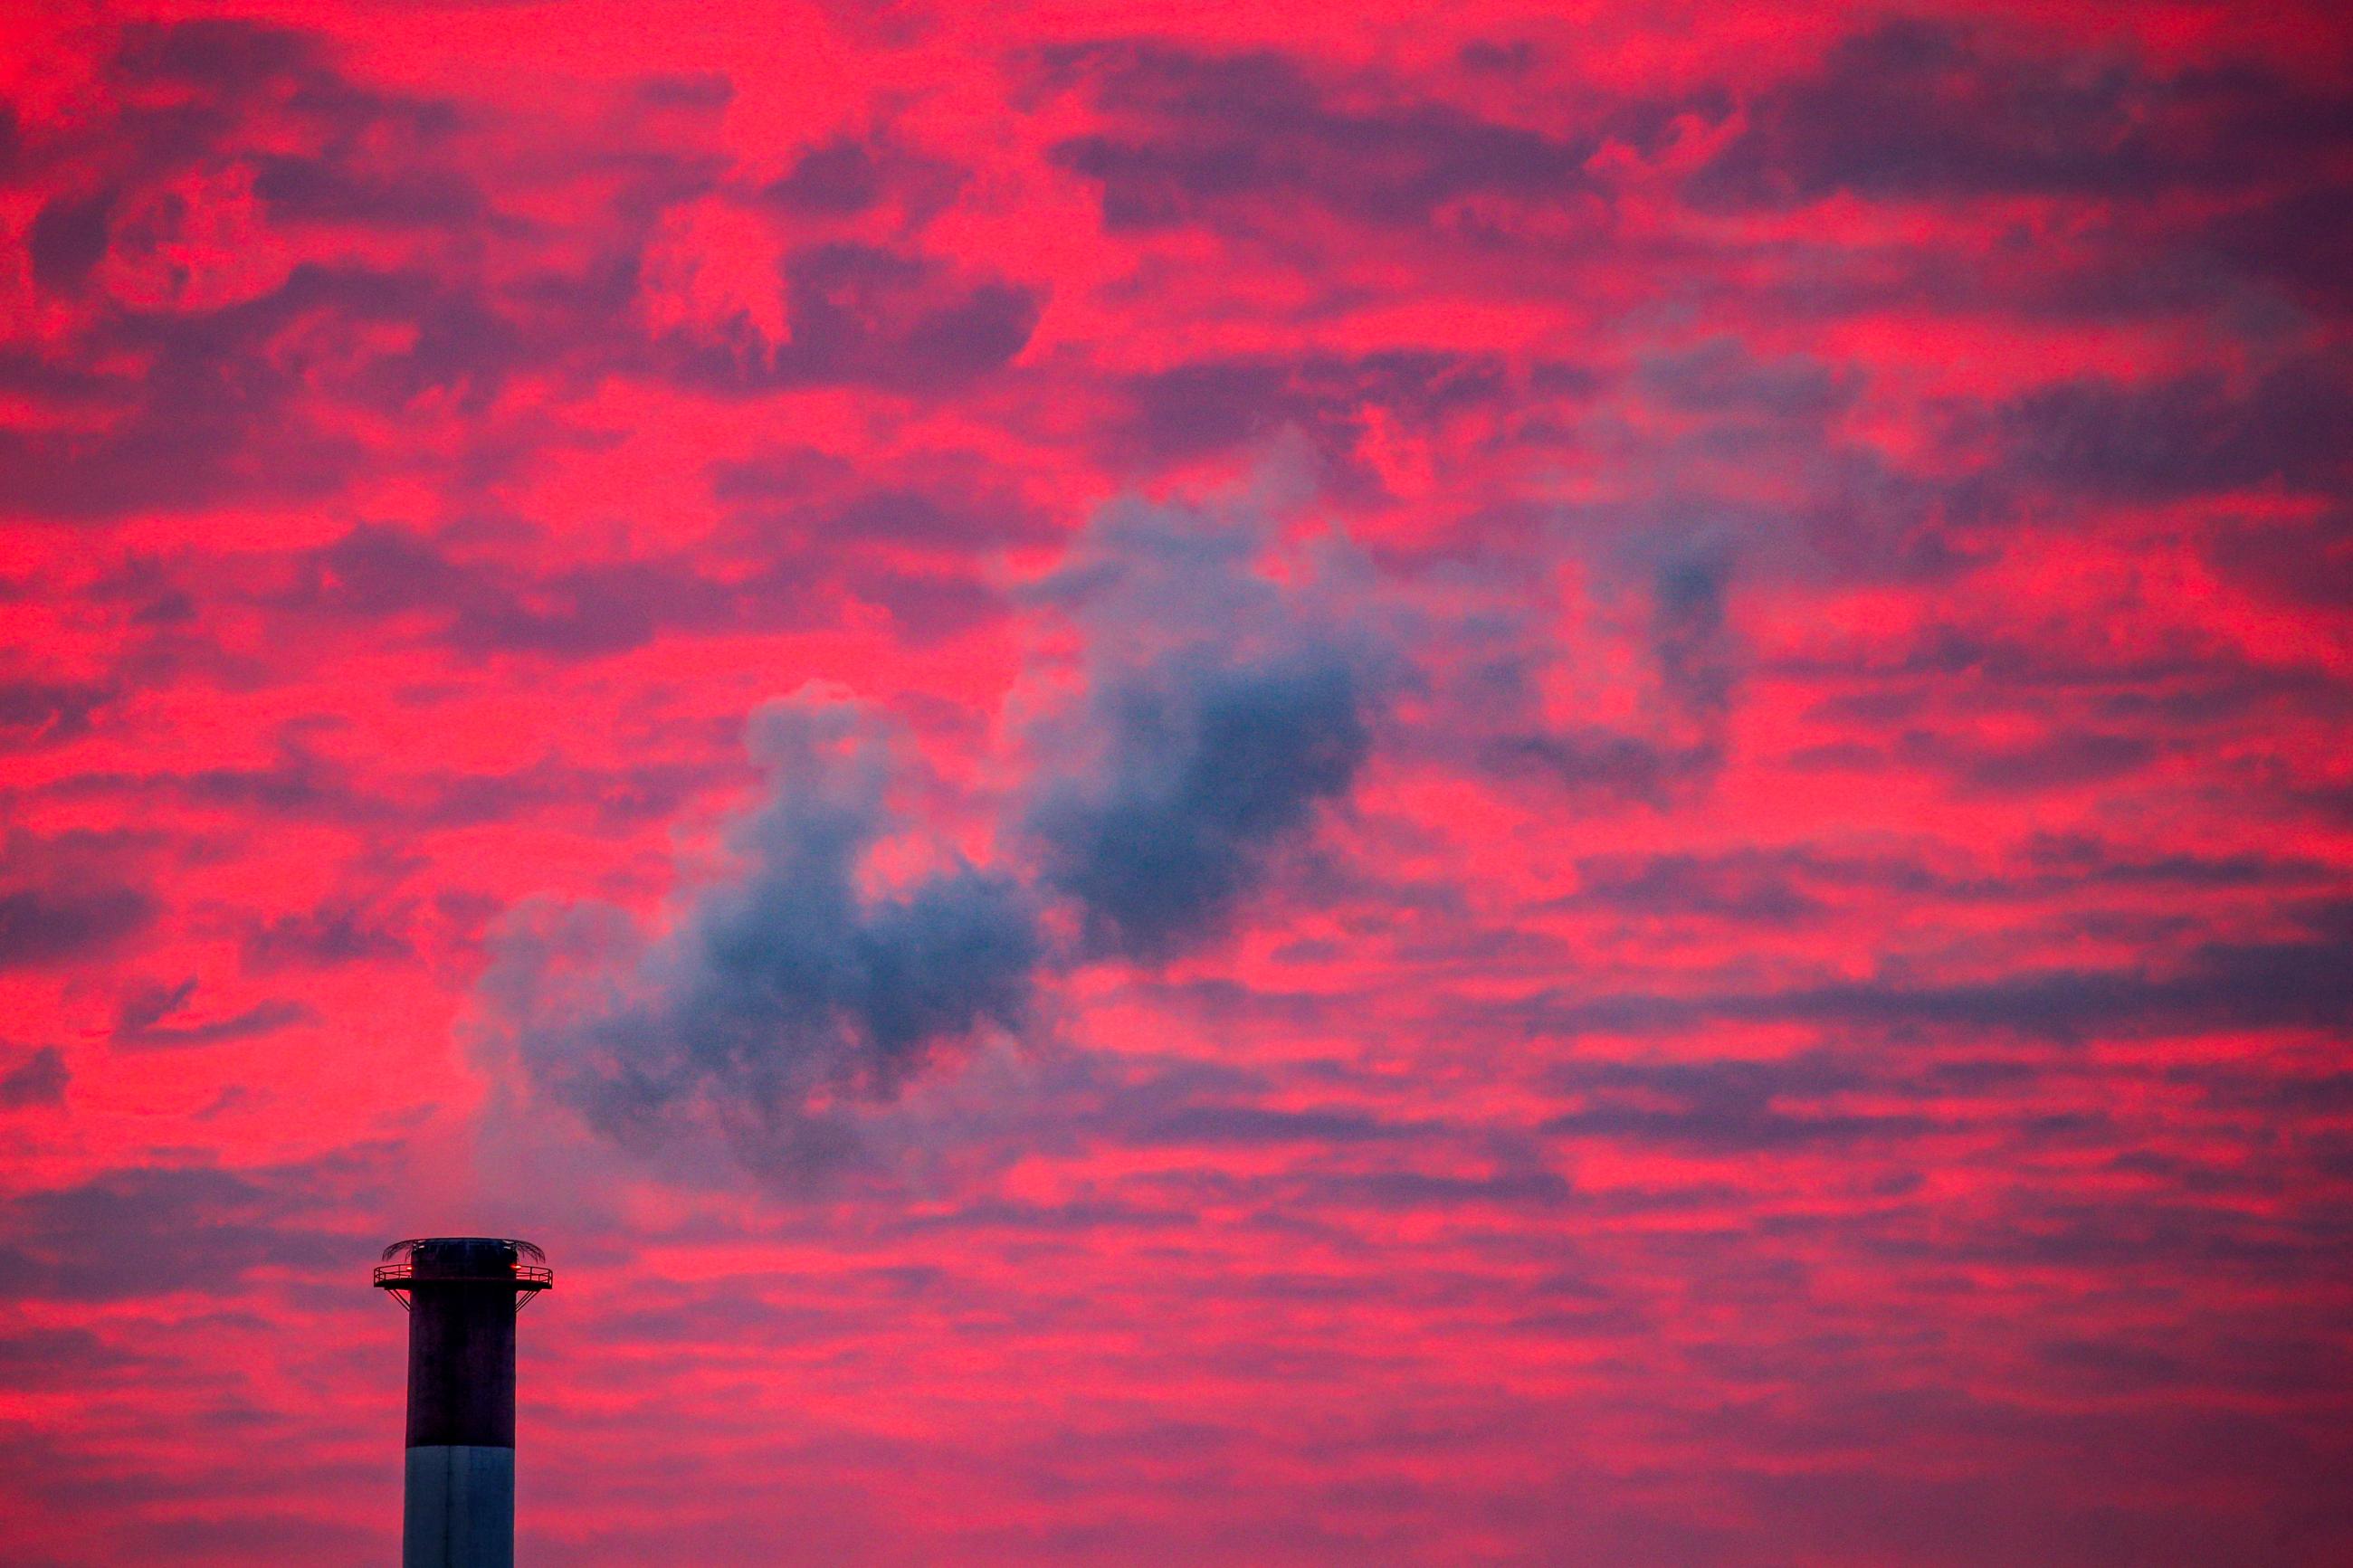 Steam rises from a smoke stack at sunset in Lansing, Michigan, U.S., January 17, 2018. REUTERS/Brendan McDermid